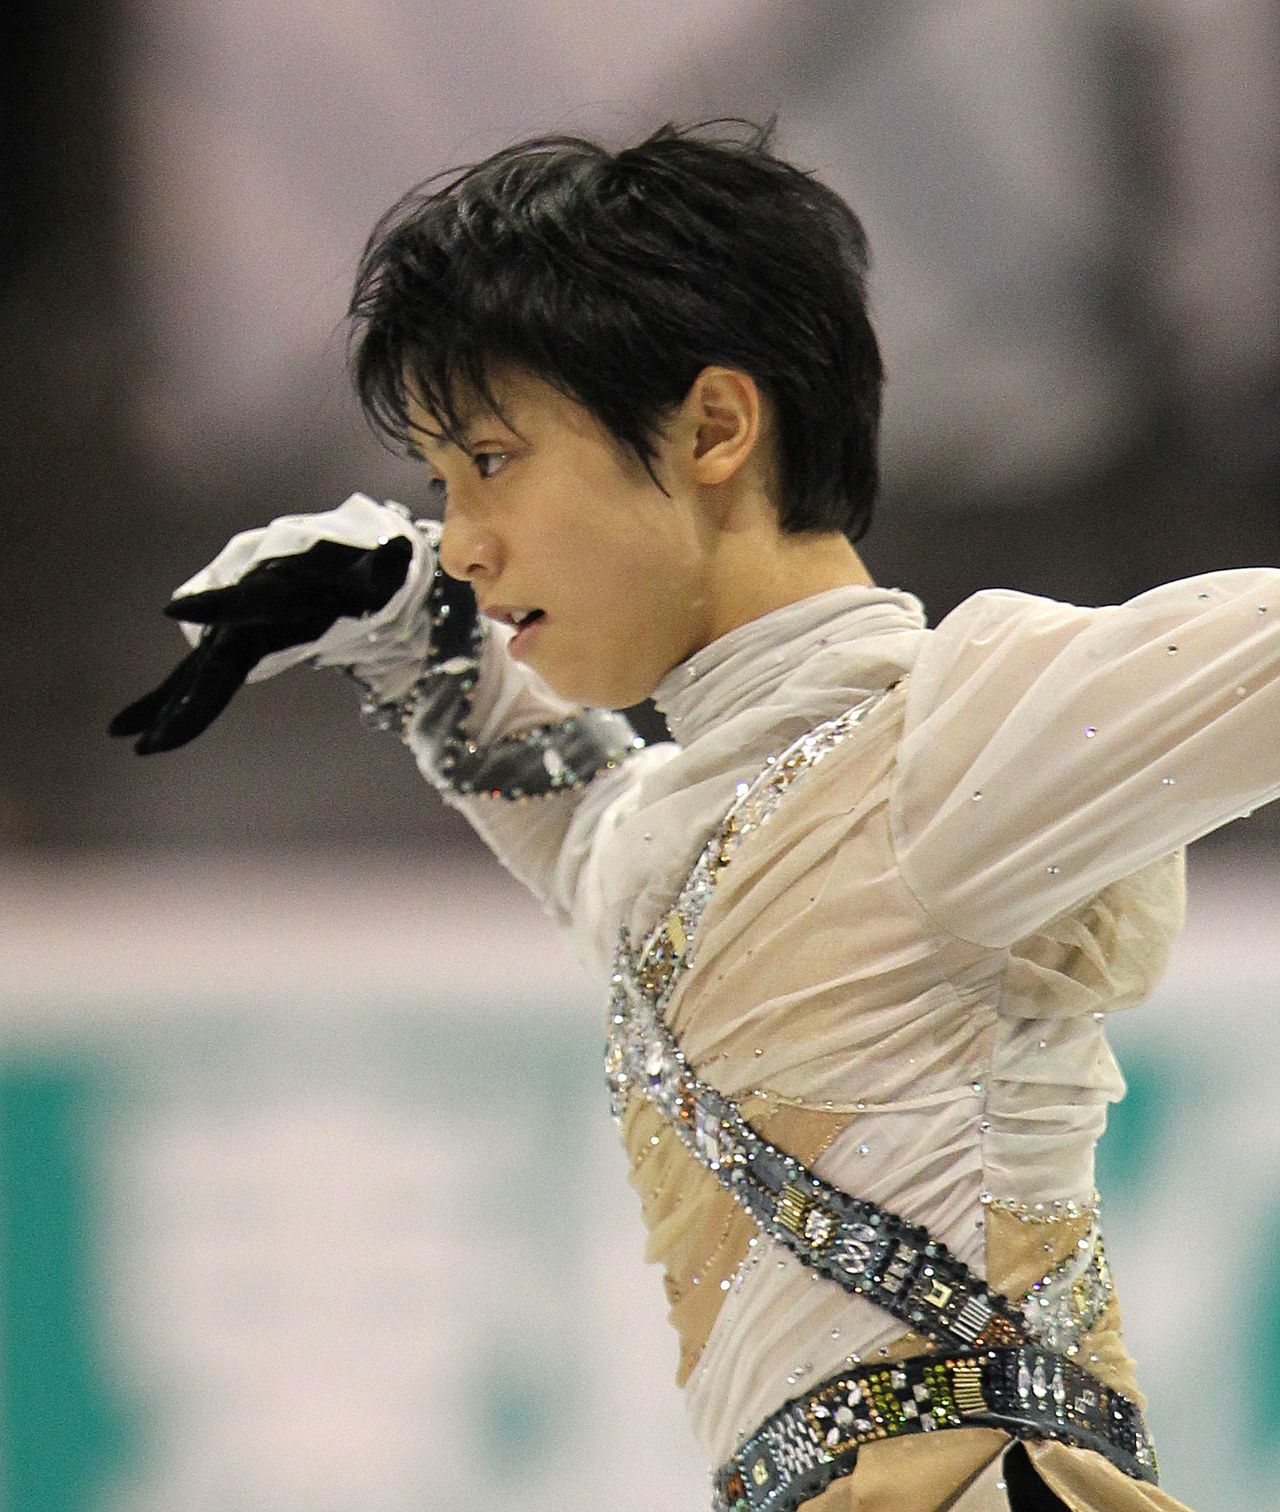 Hanyū Yuzuru in the free skating program during his first appearance in the Grand Prix Final in Quebec on December 10, 2011. (© Jiji)